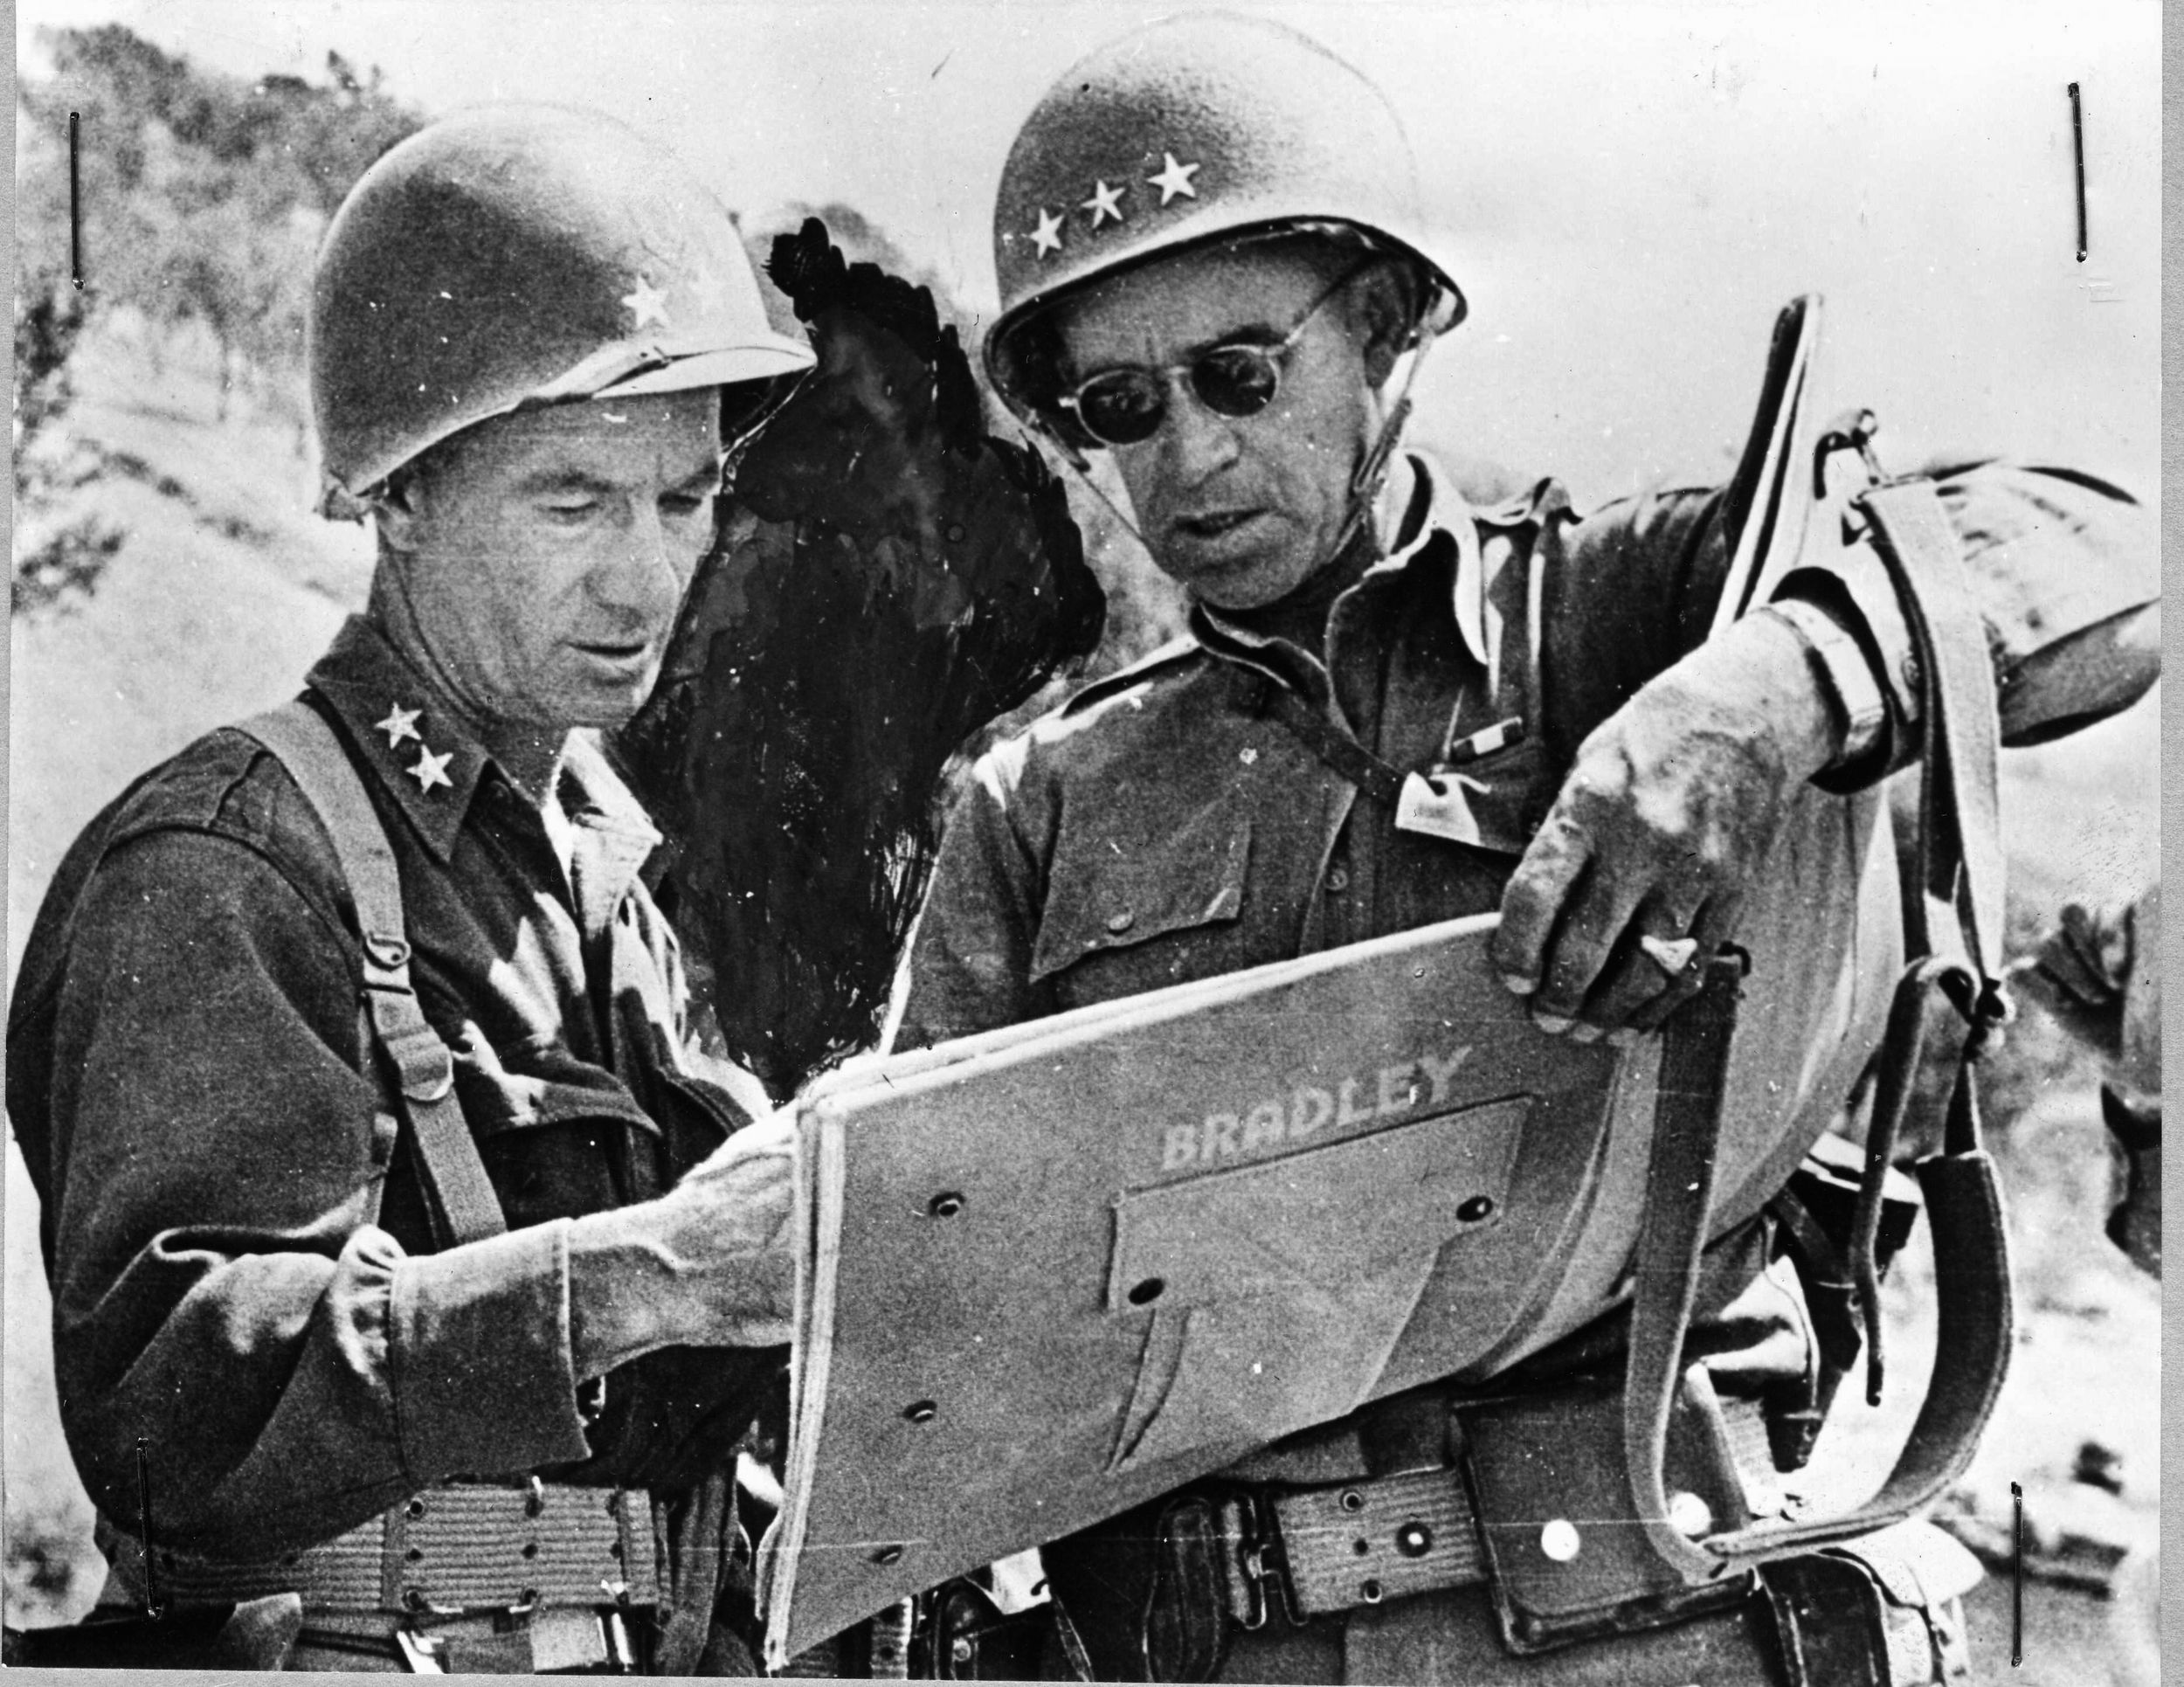 Near the town of South Caterina, Sicily, General Omar Bradley (right) confers with Major General Terry Allen, commander of the U.S. 1st Infantry Division. In Sicily, Bradley served as a corps commander in General George Patton’s Seventh Army. 